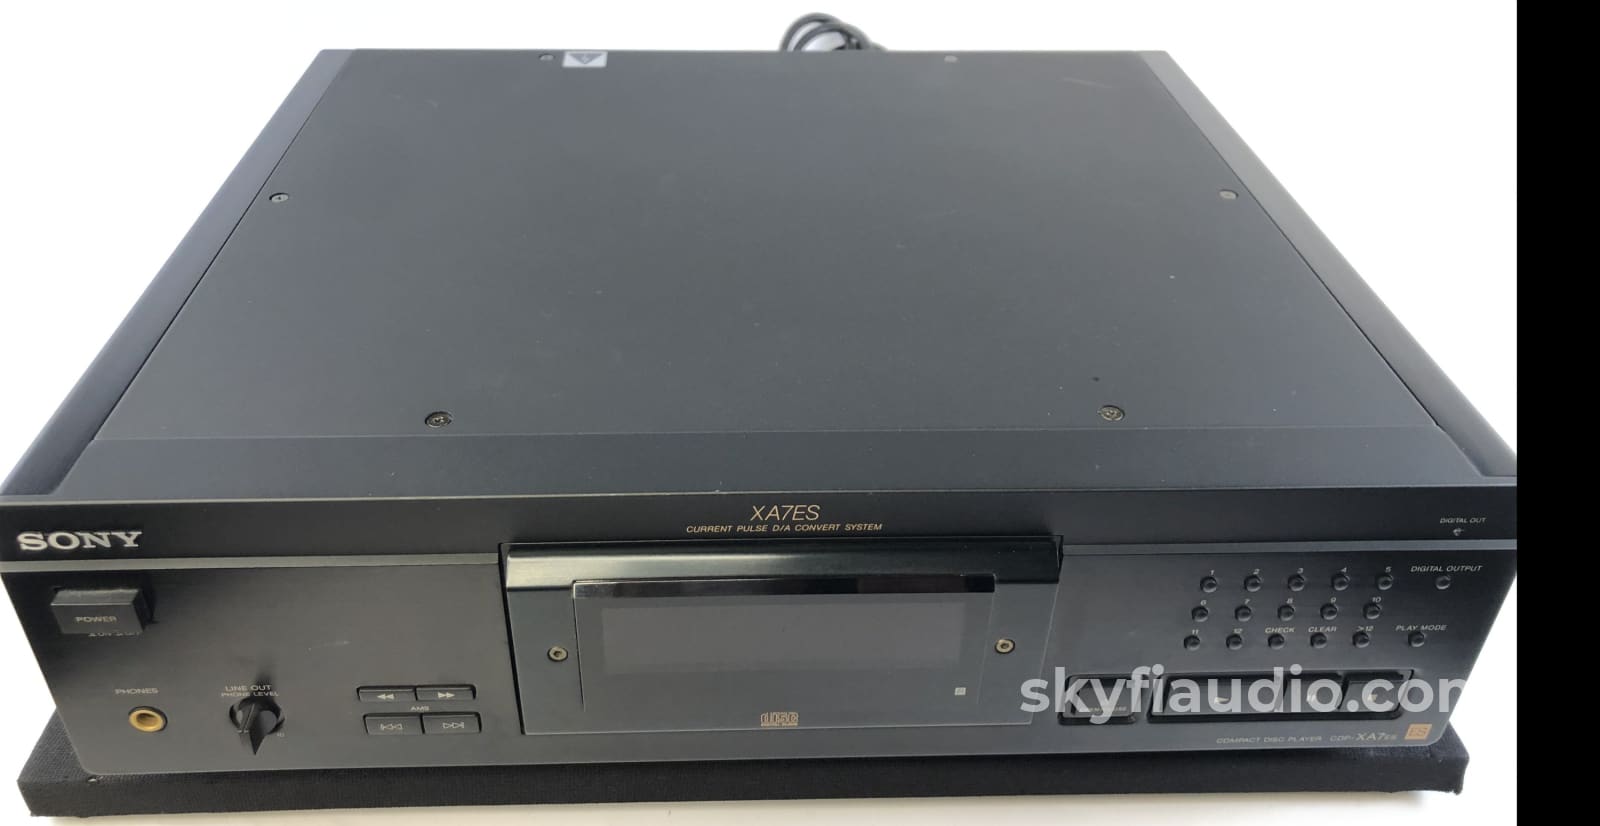 Sony CDP-XA7ES CD Player - One of the Best From The 1990's - With Remo